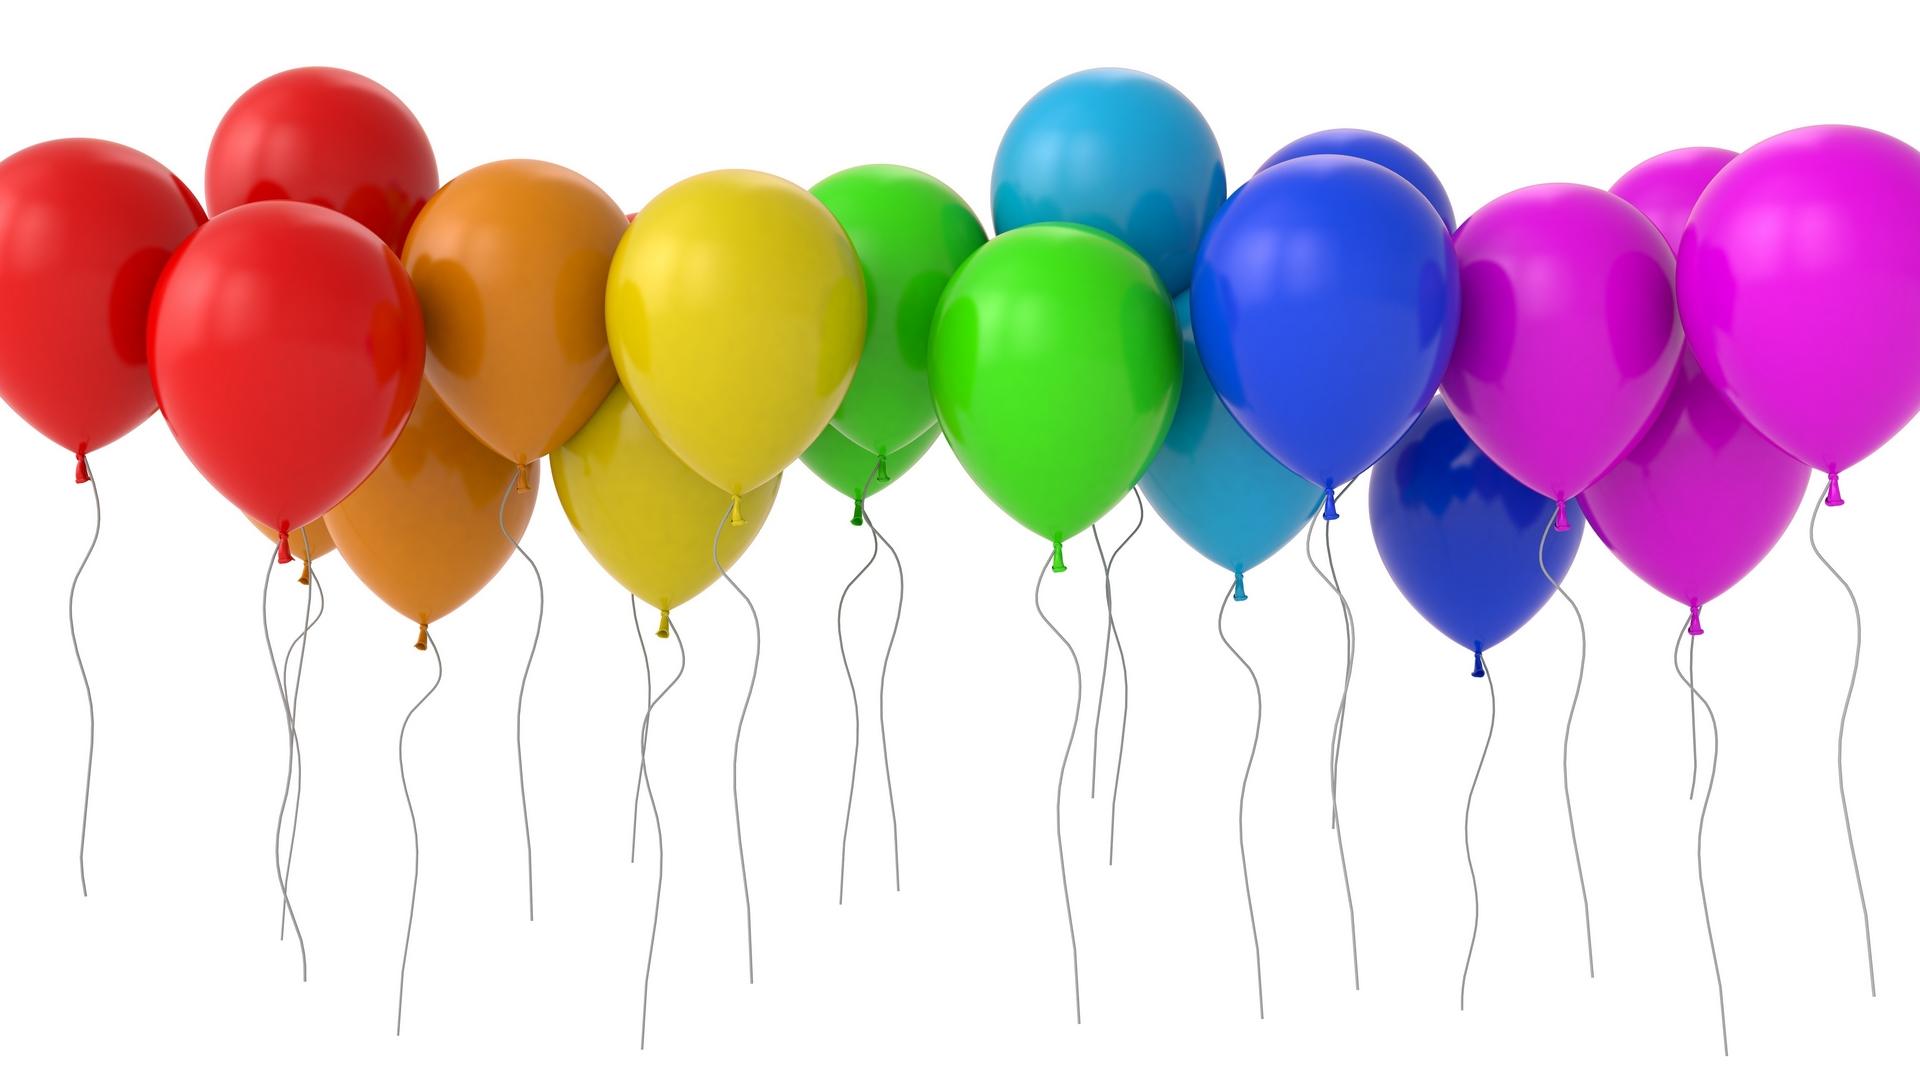 Free Balloons, Download Free Clip Art, Free Clip Art on